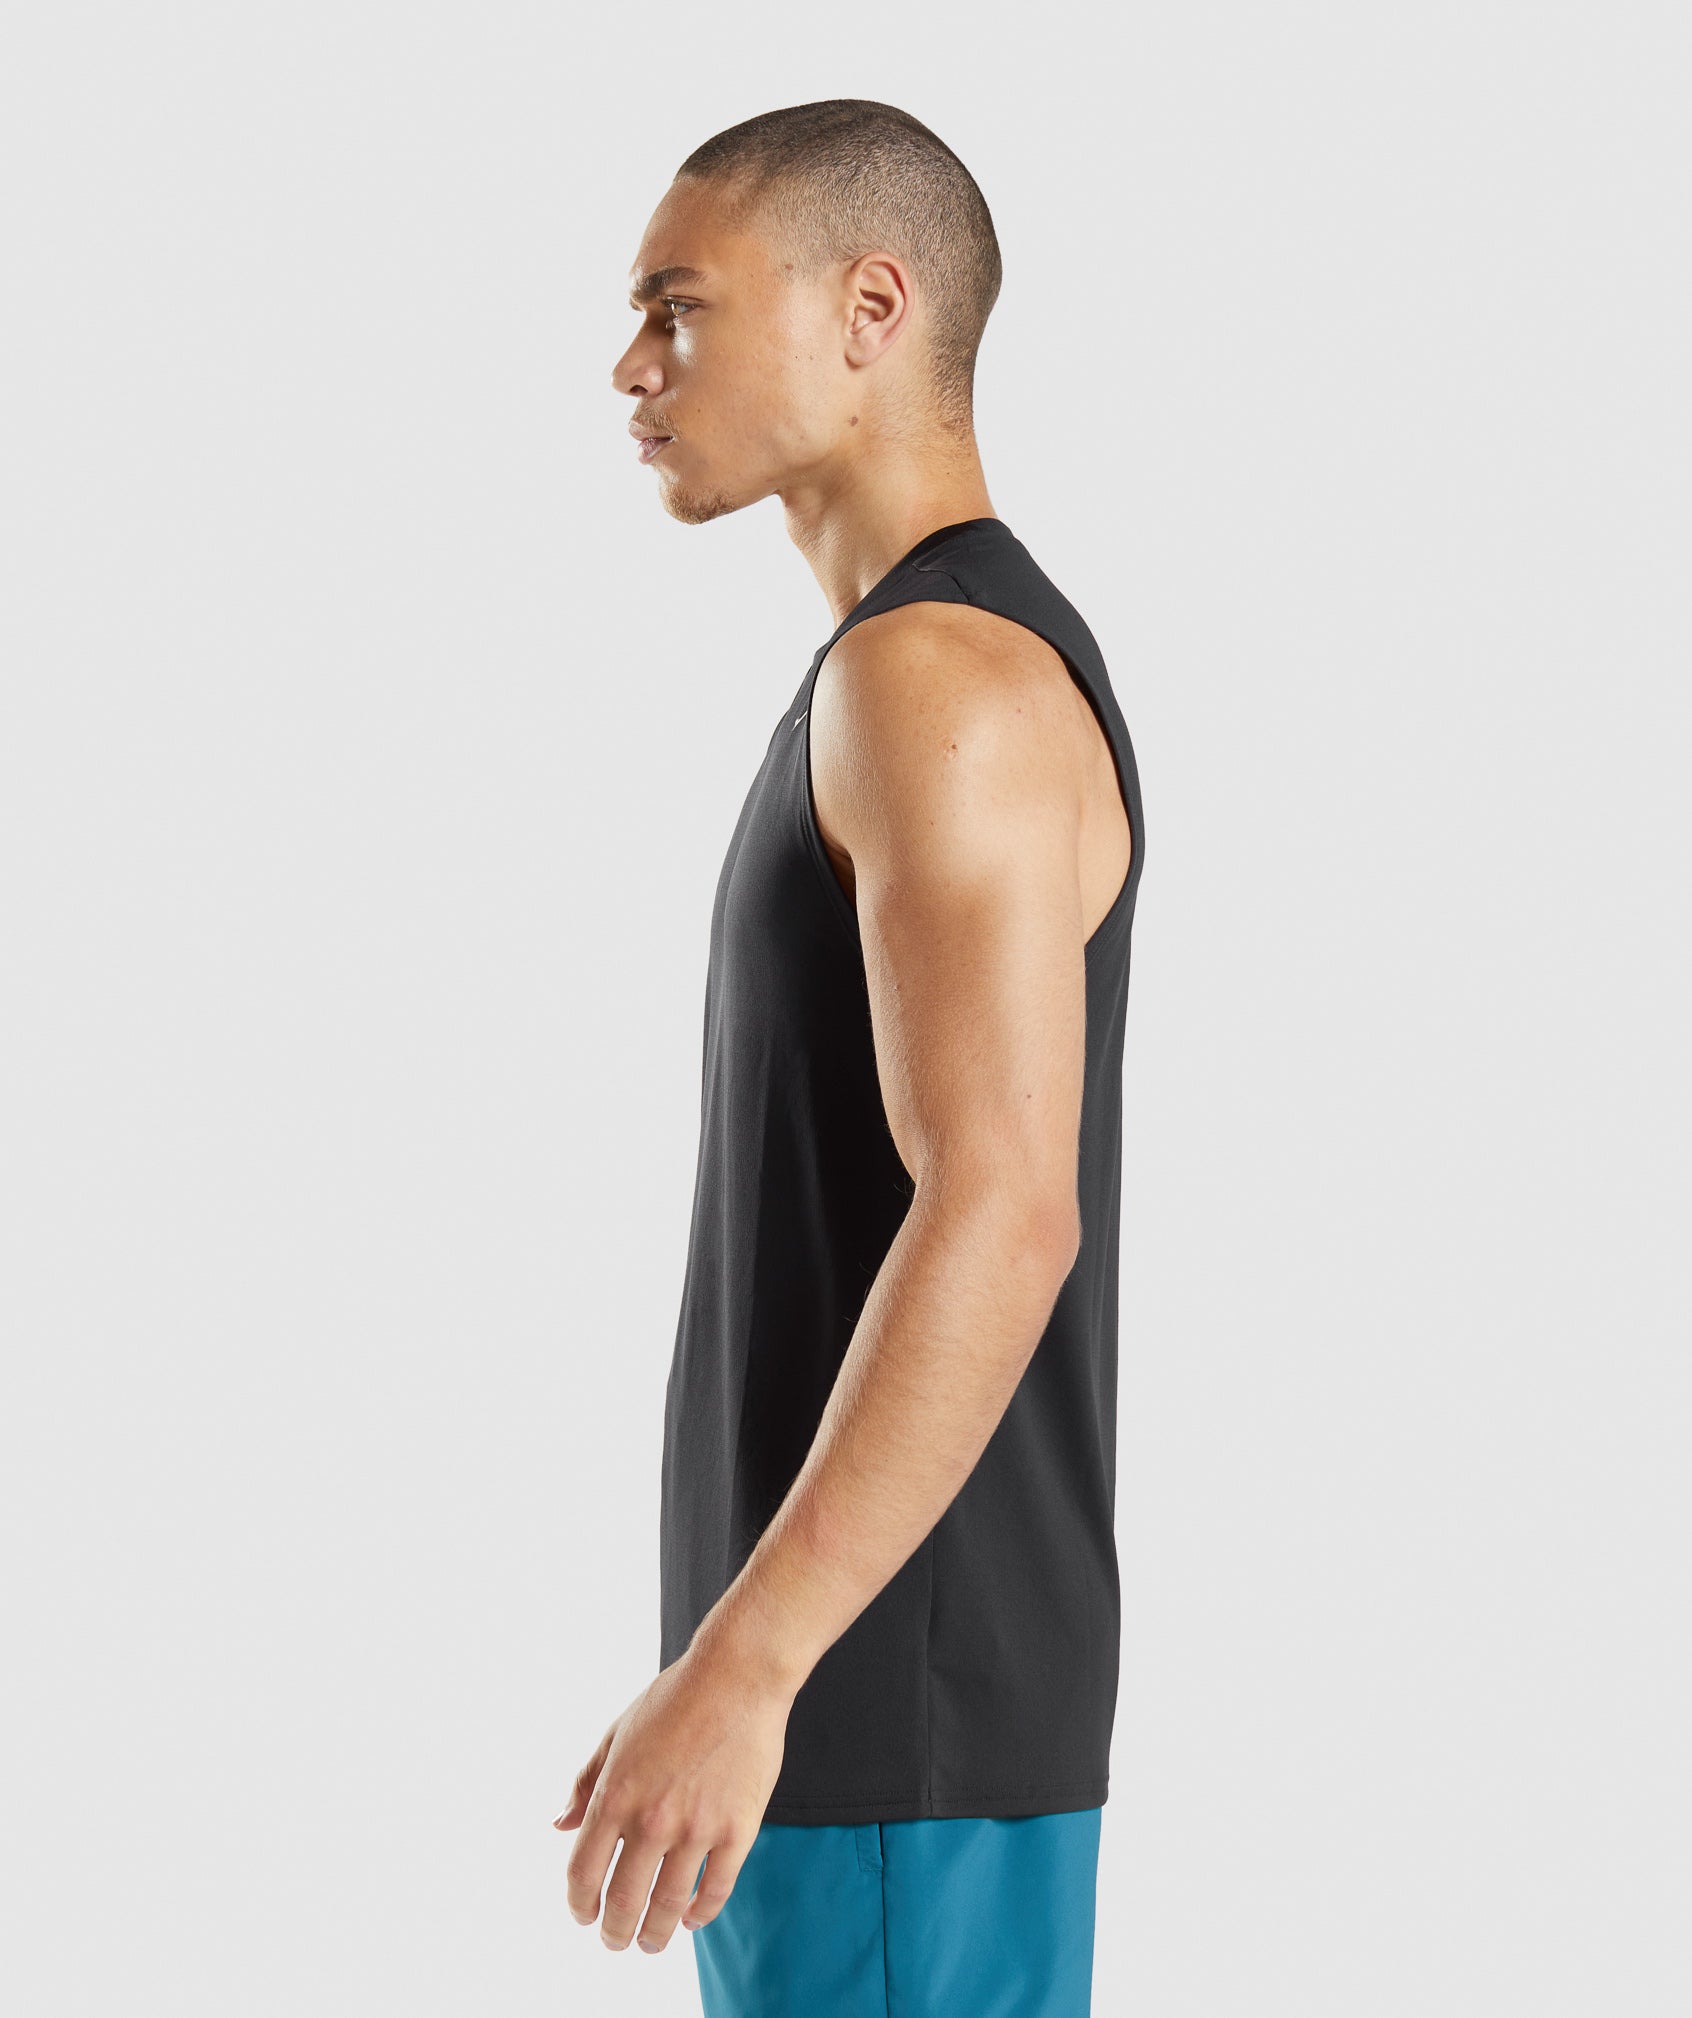 Arrival Sleeveless T-Shirt in Black - view 3